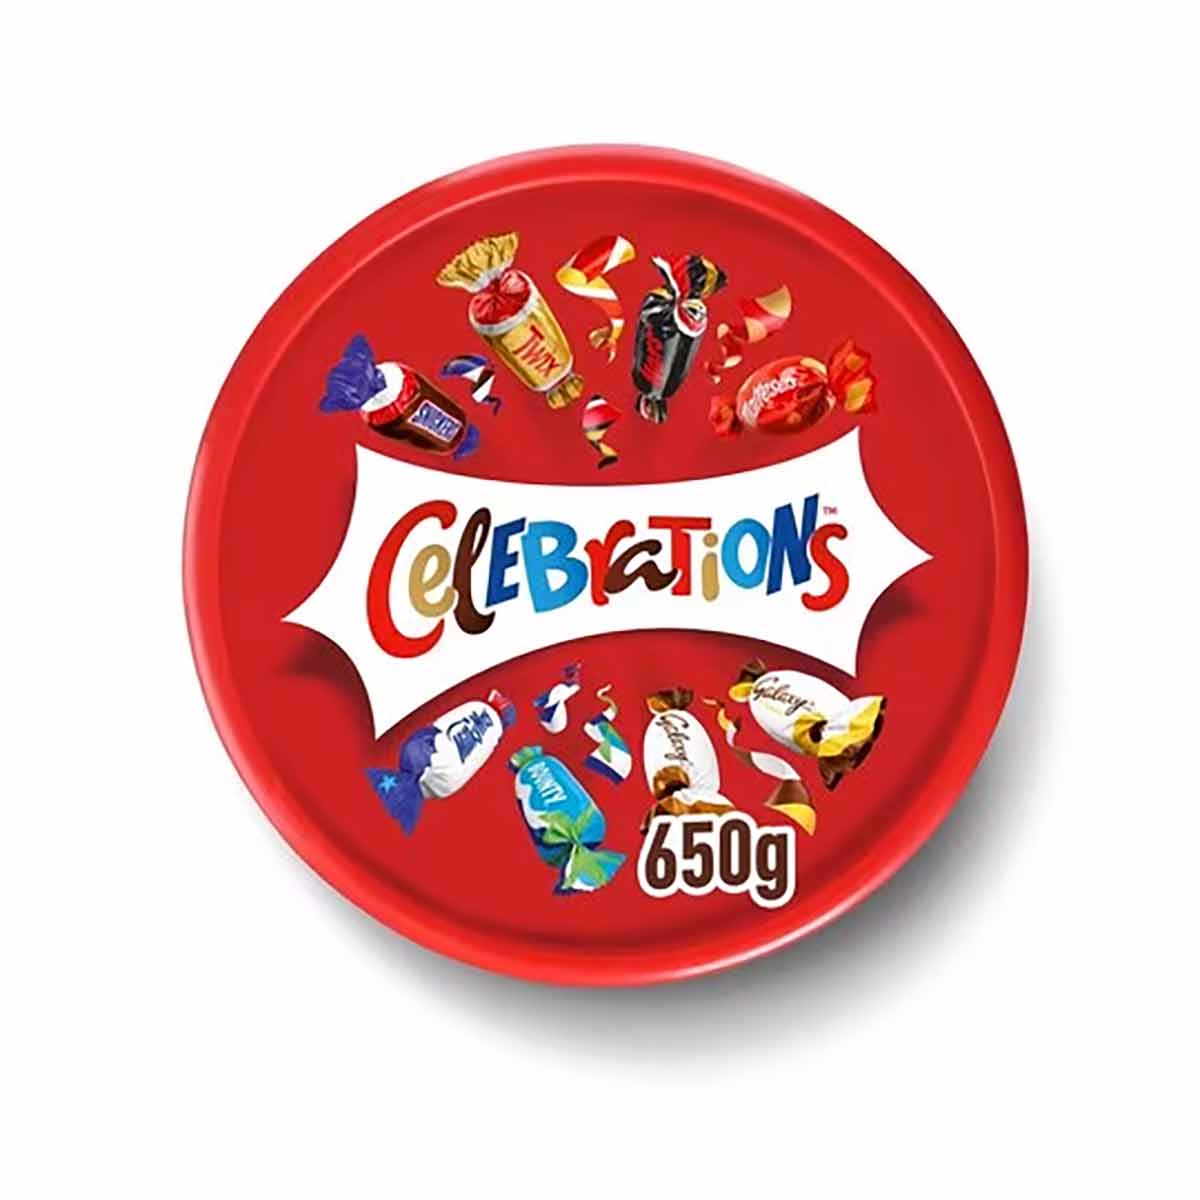 Image Of Tub Lid For Are Celebrations Vegan Post